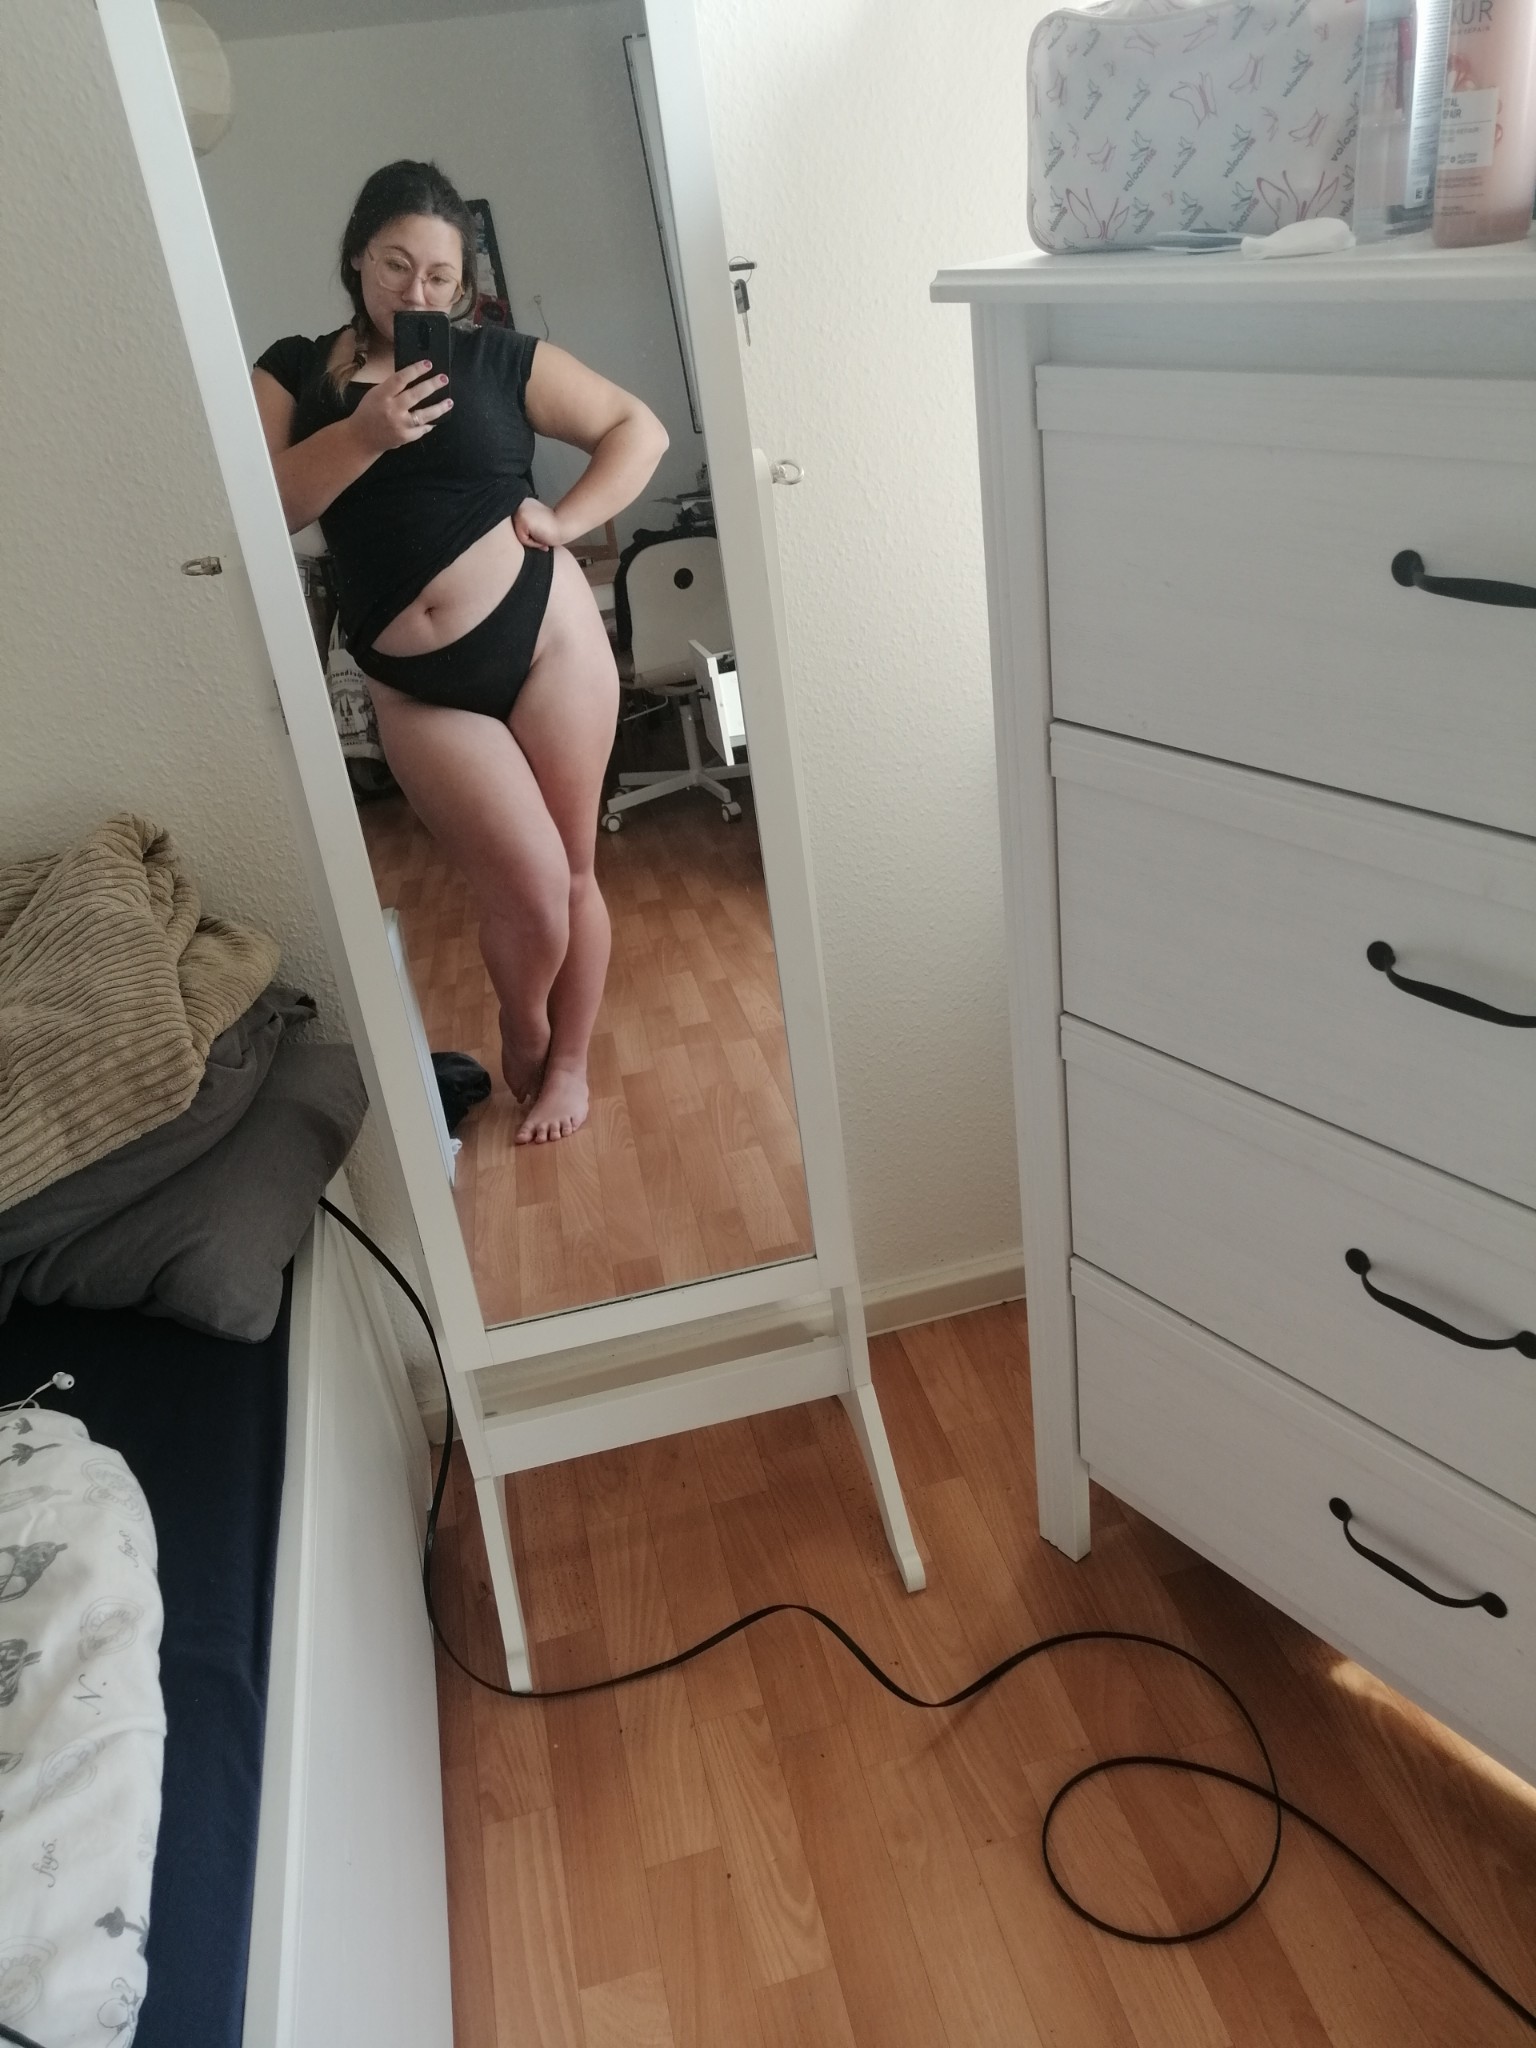 light-my-cigarette-darling:Just a quick reminder for you all out there (and for me), that you are precious and your body is, too!First day of posting pictures of me and it kinda feels weird but I really wanted to do this! 